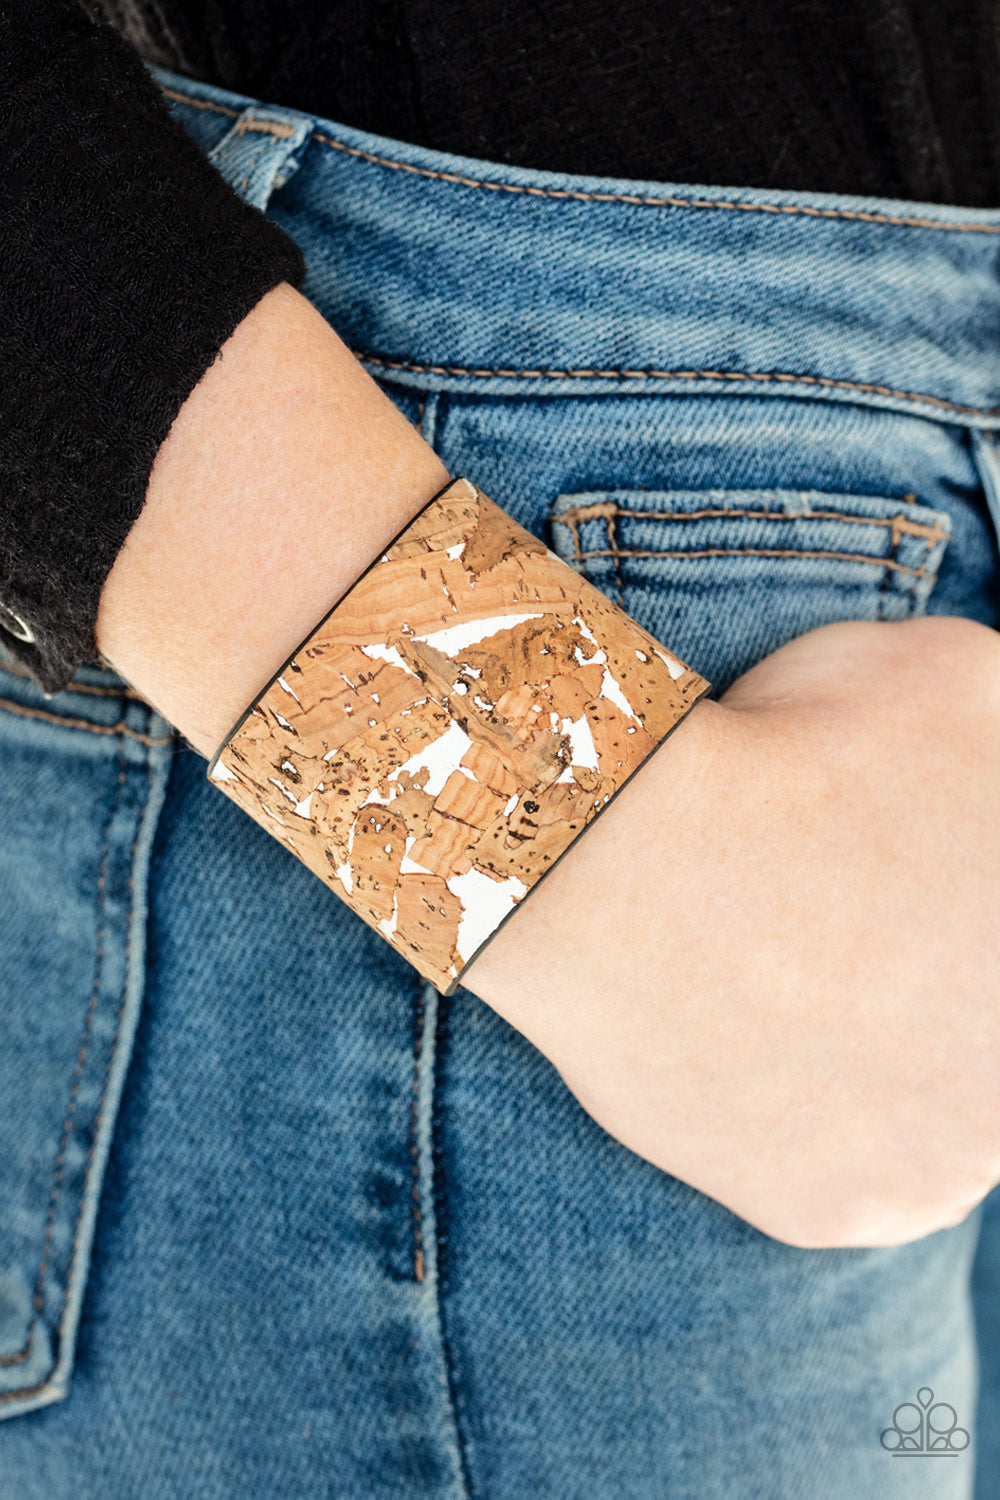 Cork Congo - White Cork and Leather Bracelet - Paparazzi Accessories - Pieces of cork have been plastered across the front of a shiny white leather band, creating an earthy look around the wrist. Features an adjustable snap closure. Sold as one individual bracelet.